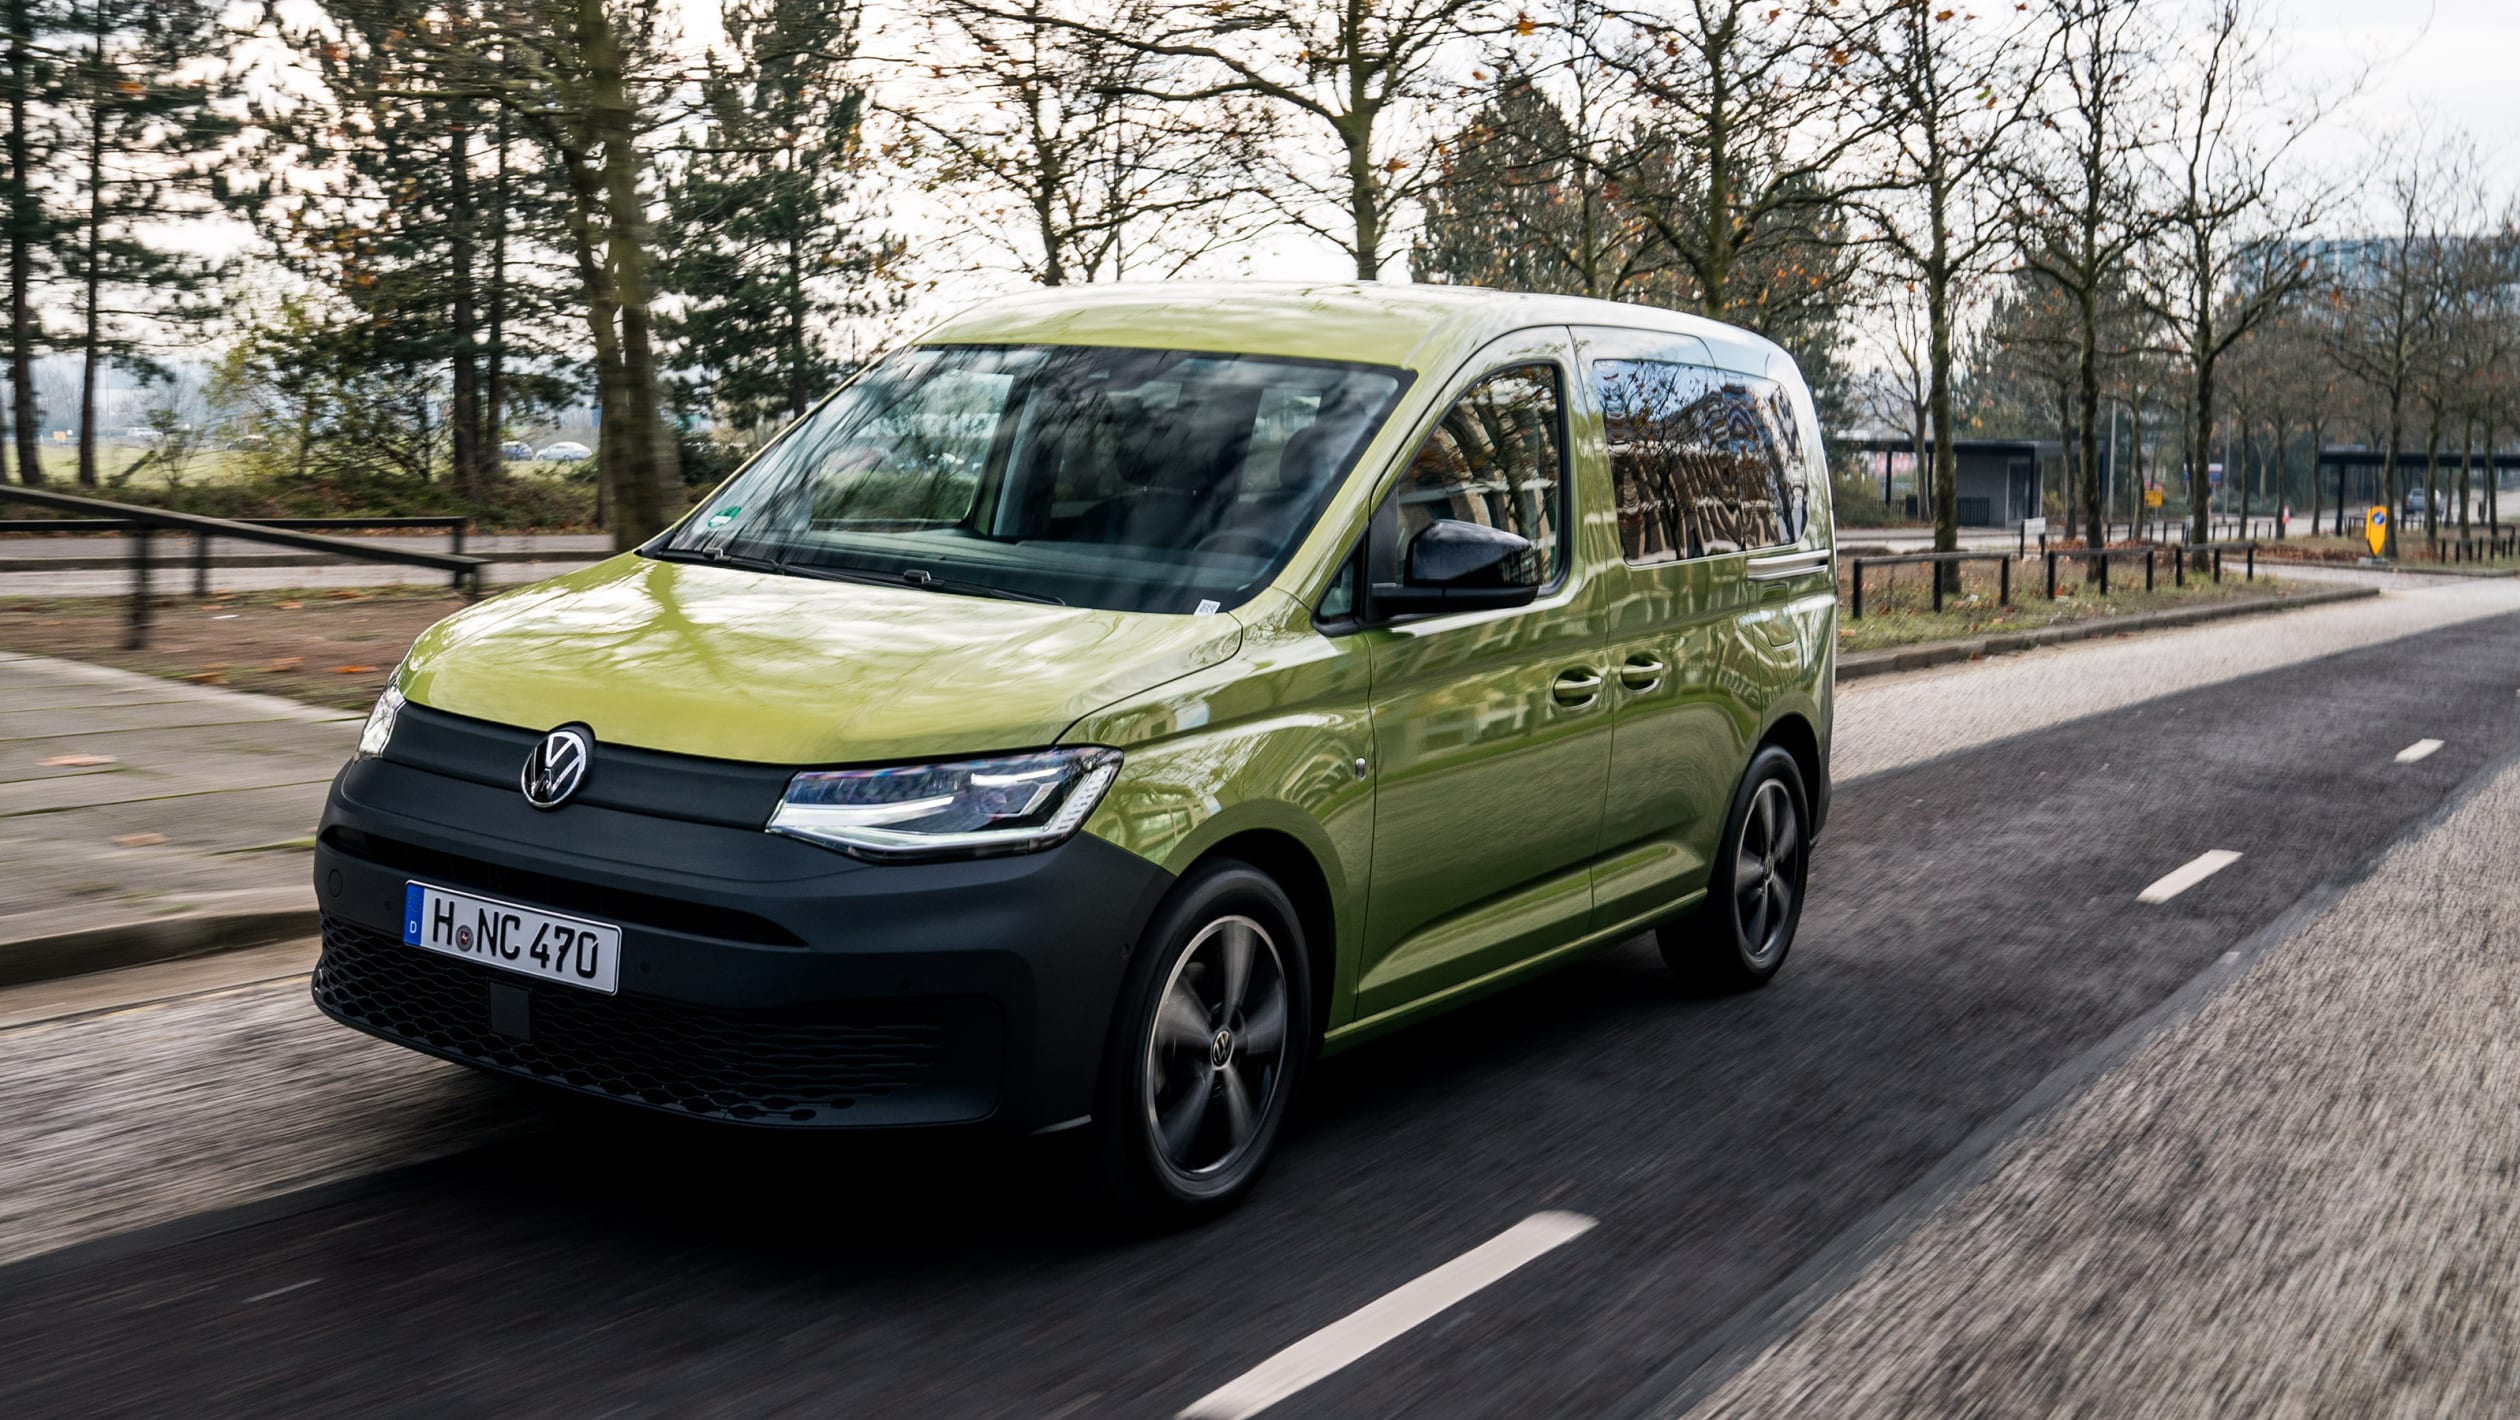 2021 Volkswagen Caddy Review - Automotive Daily